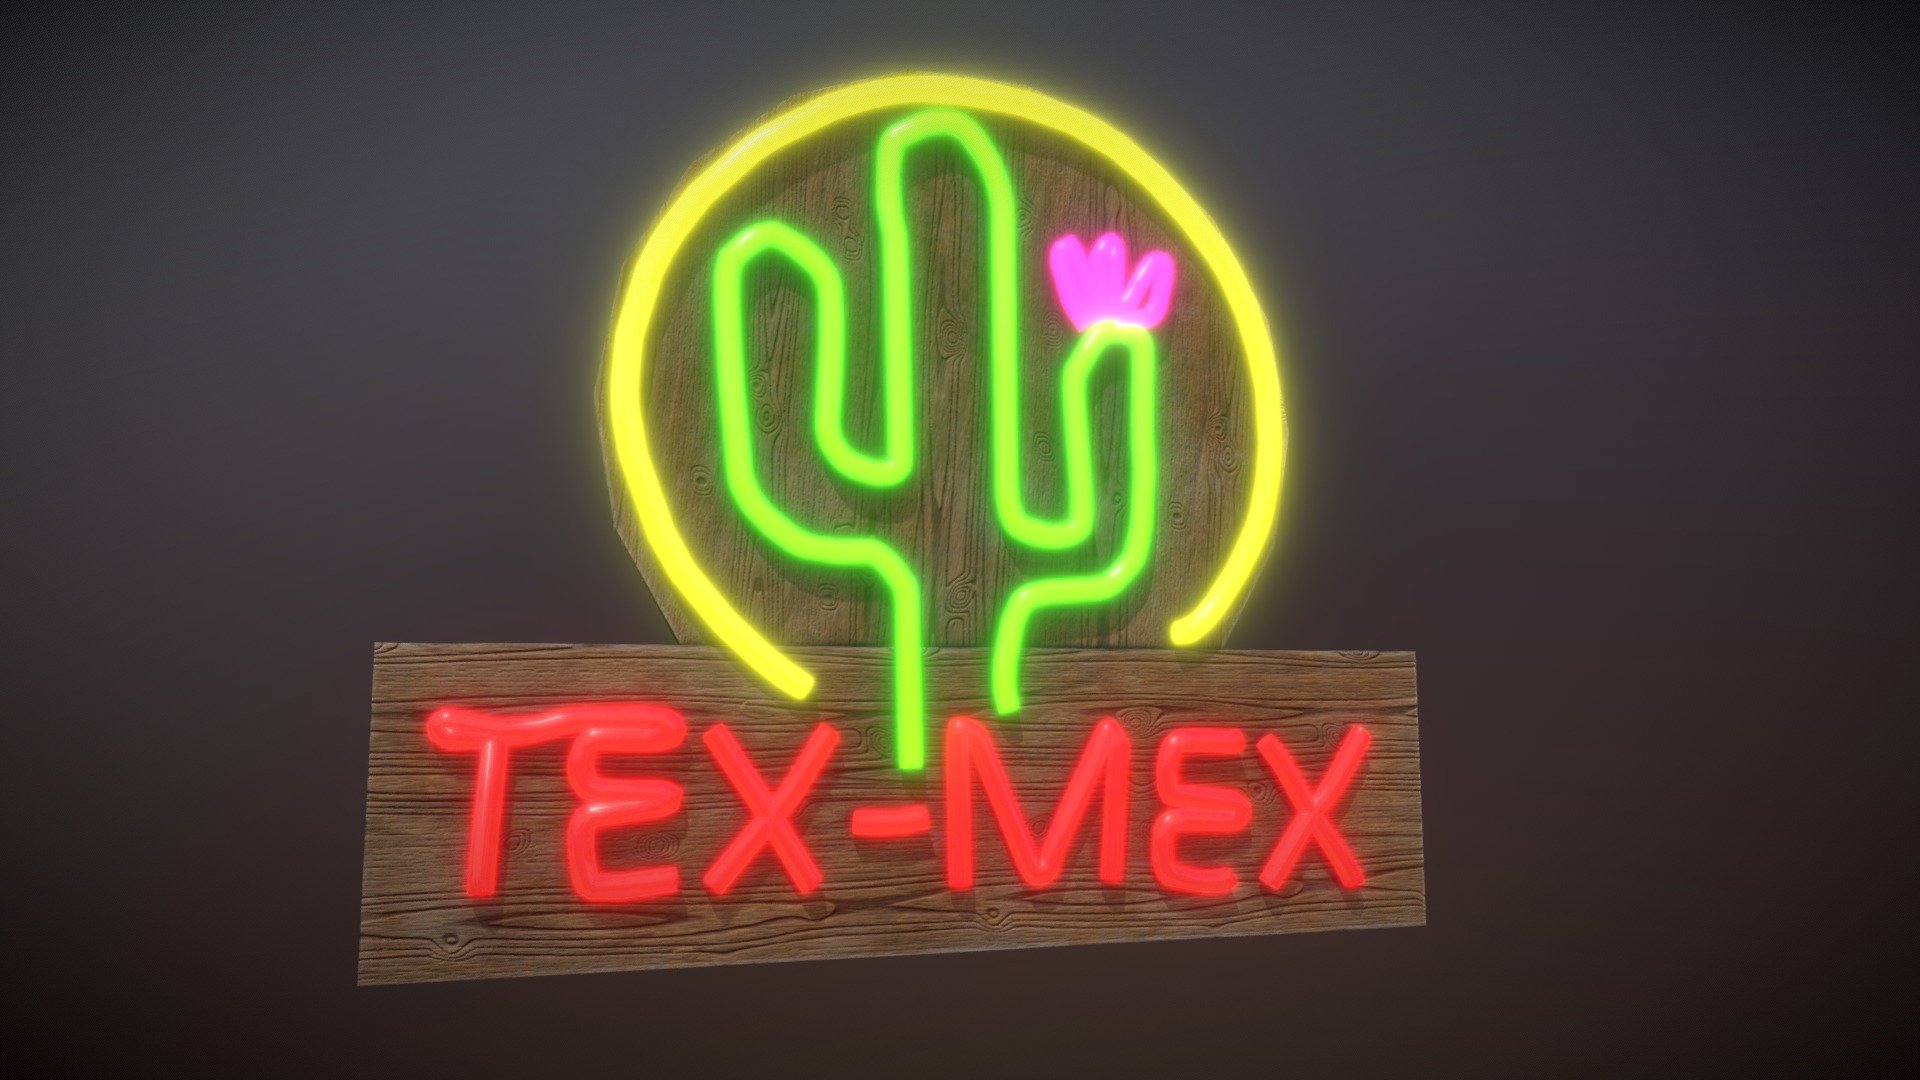 A low poly neon tex-mex sign in neon lights with PBR Materials in two textures. A wild west prop 3d model